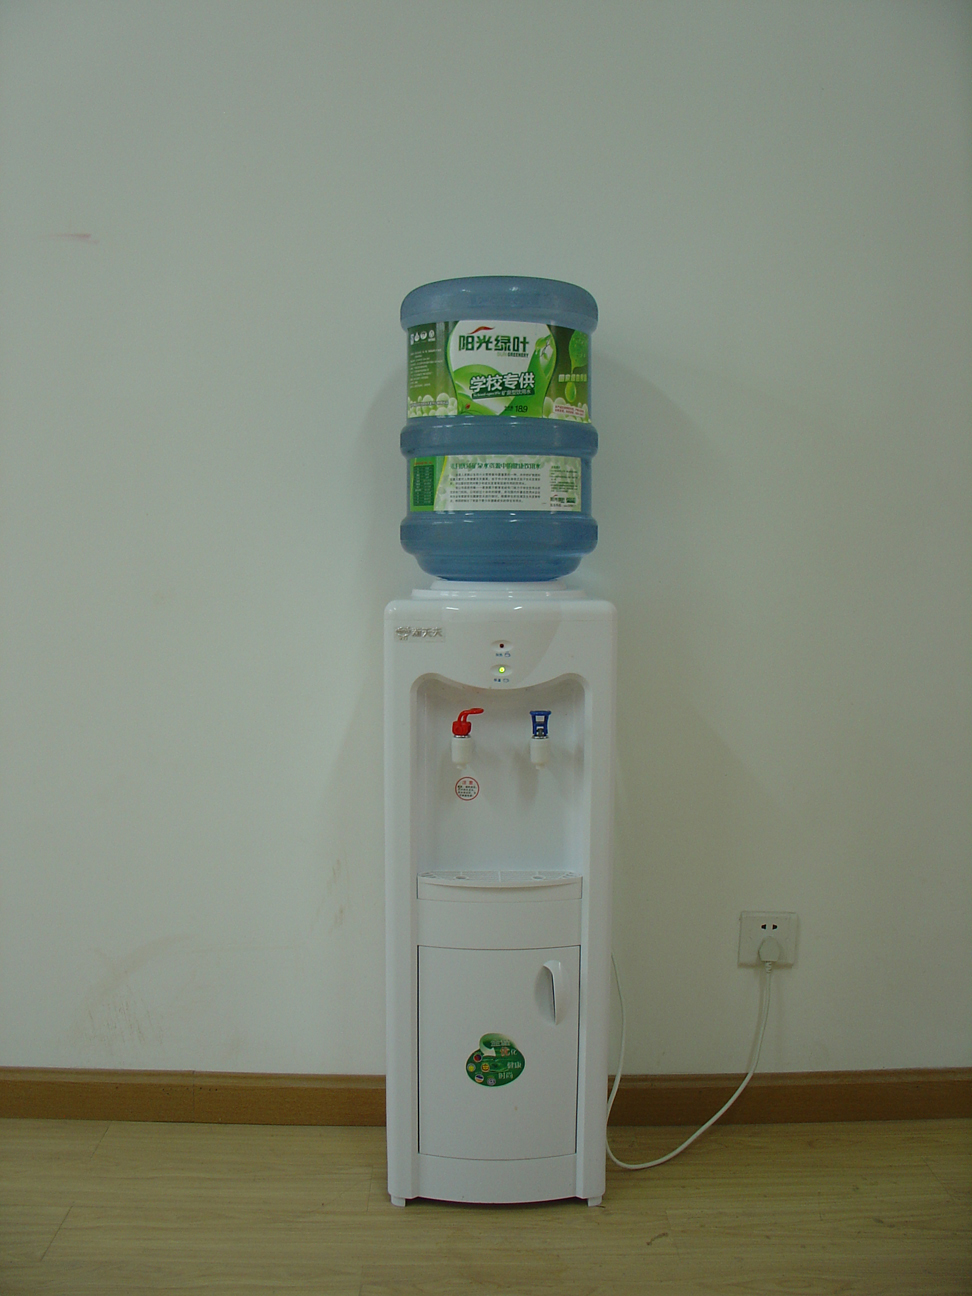 Our very own water dispenser!